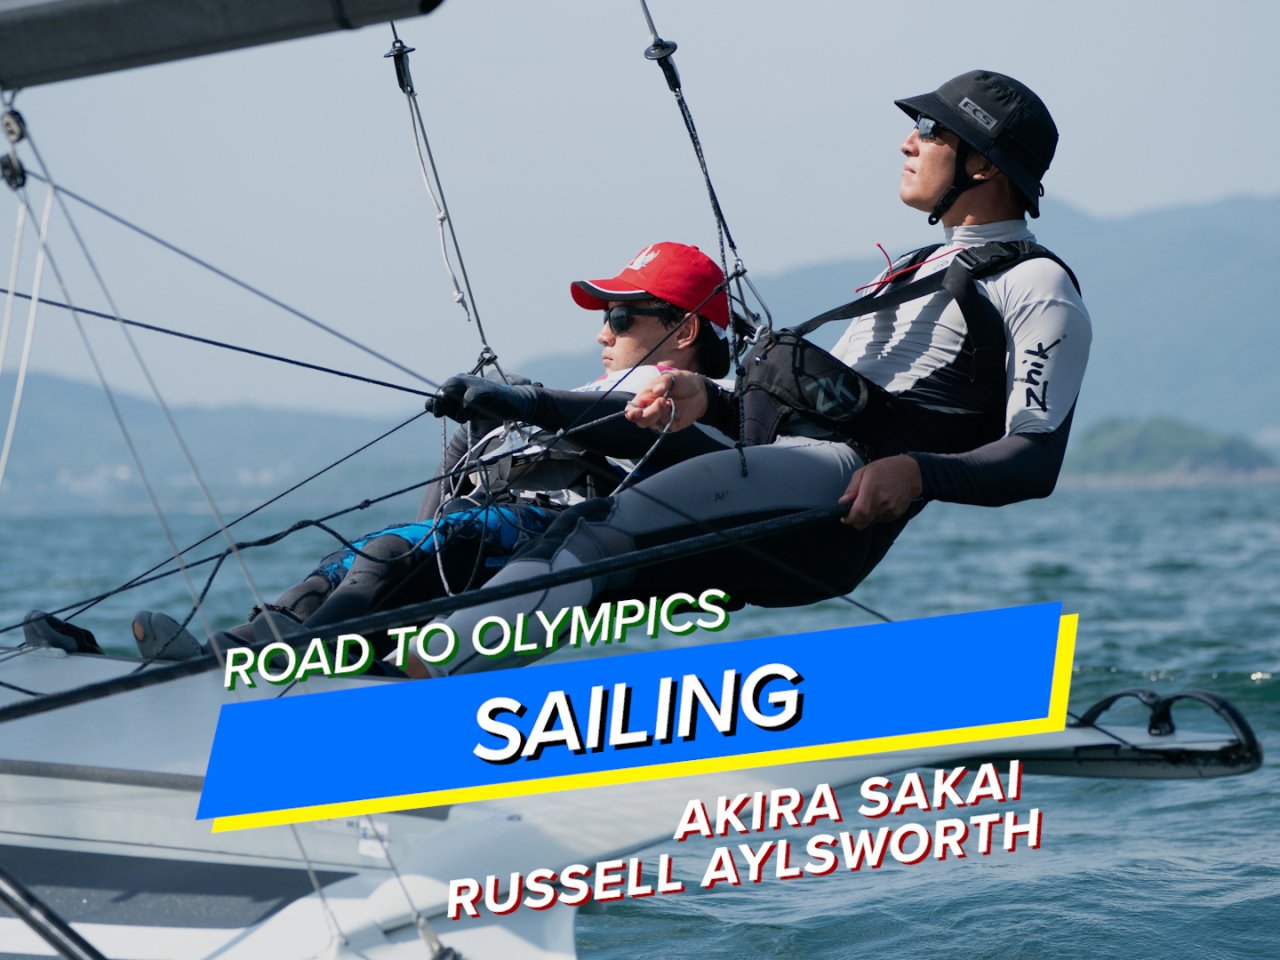 Hard work and strong bond key to success: sailing duo